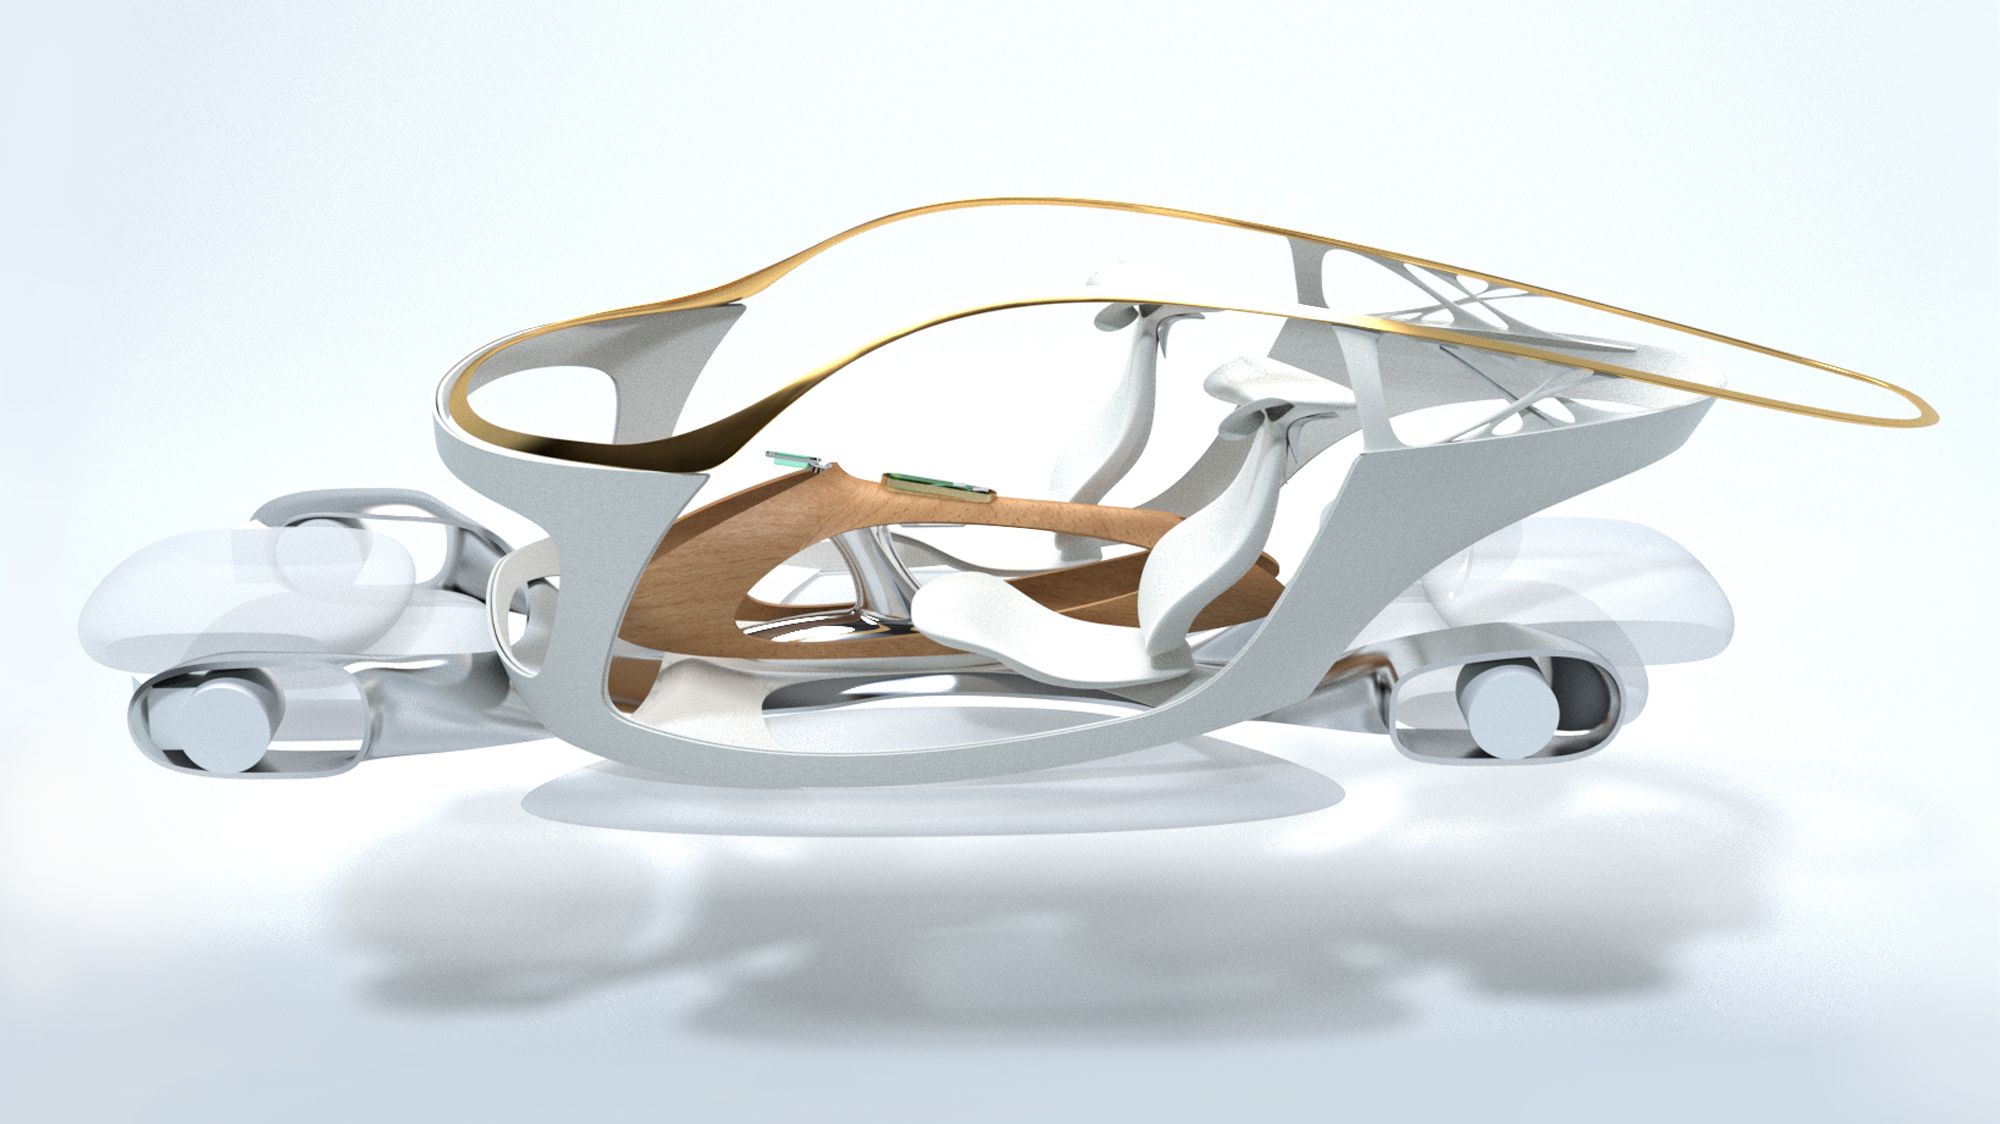 Image of a 3D futuristic-looking vehicle, sideways on, in white with wooden and gold details, seemingly hovering above the ground, on a white background.